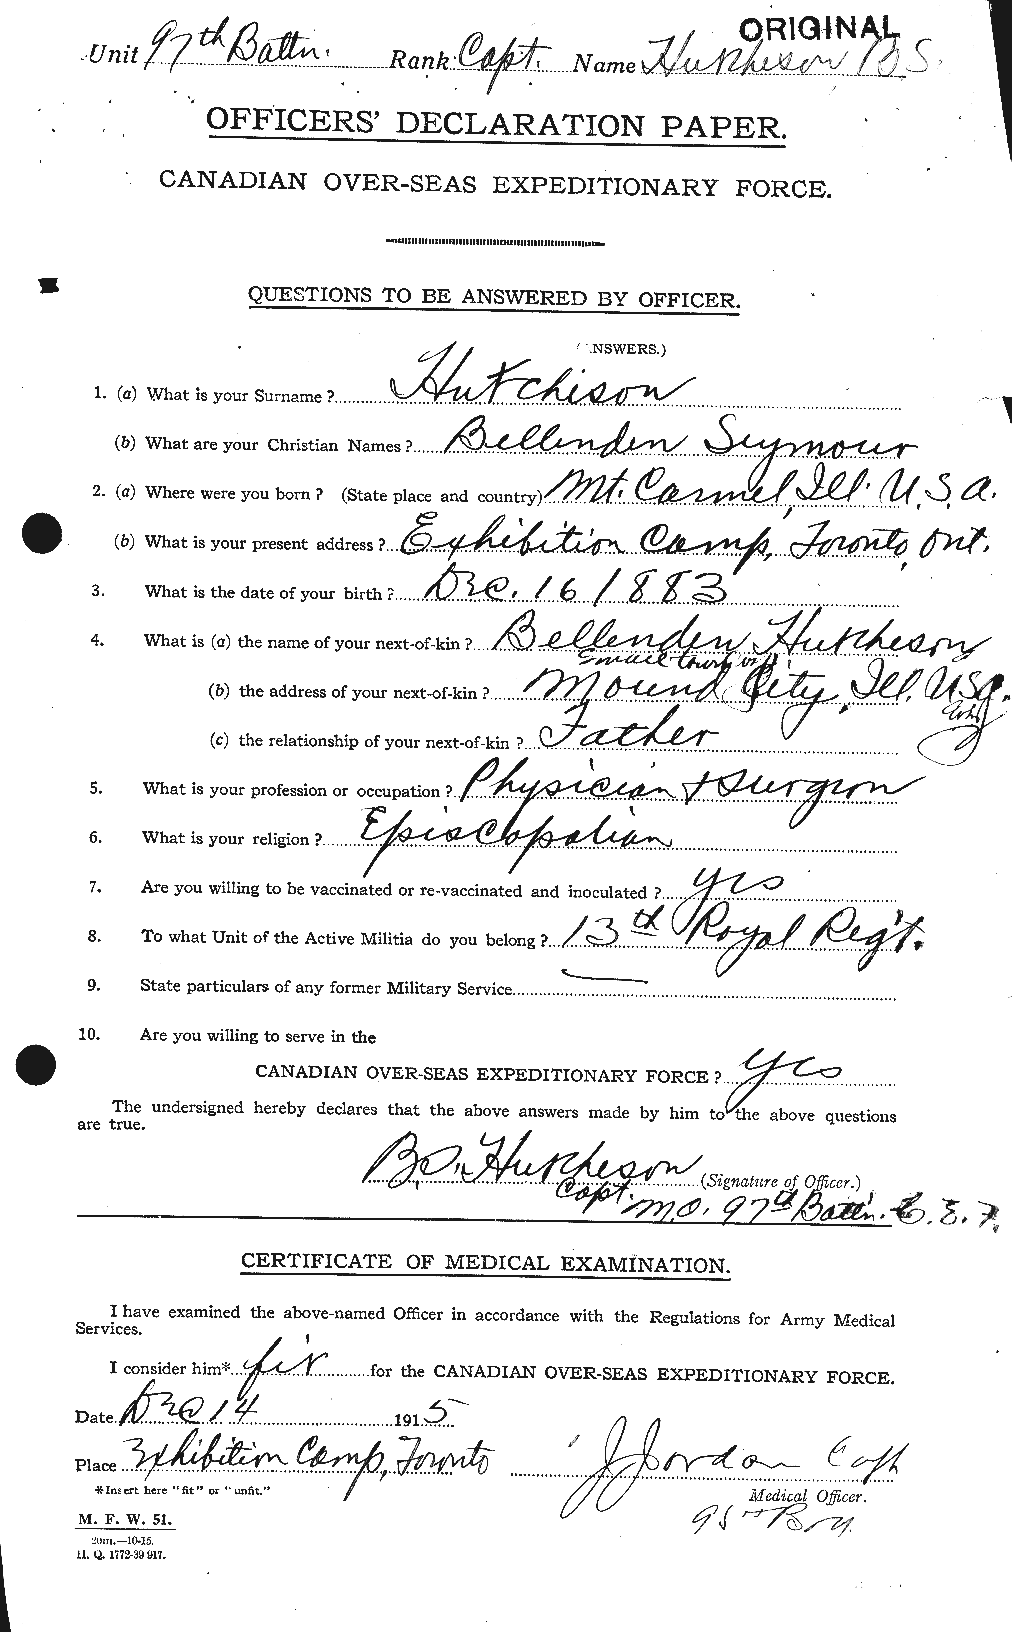 Personnel Records of the First World War - CEF 407957a